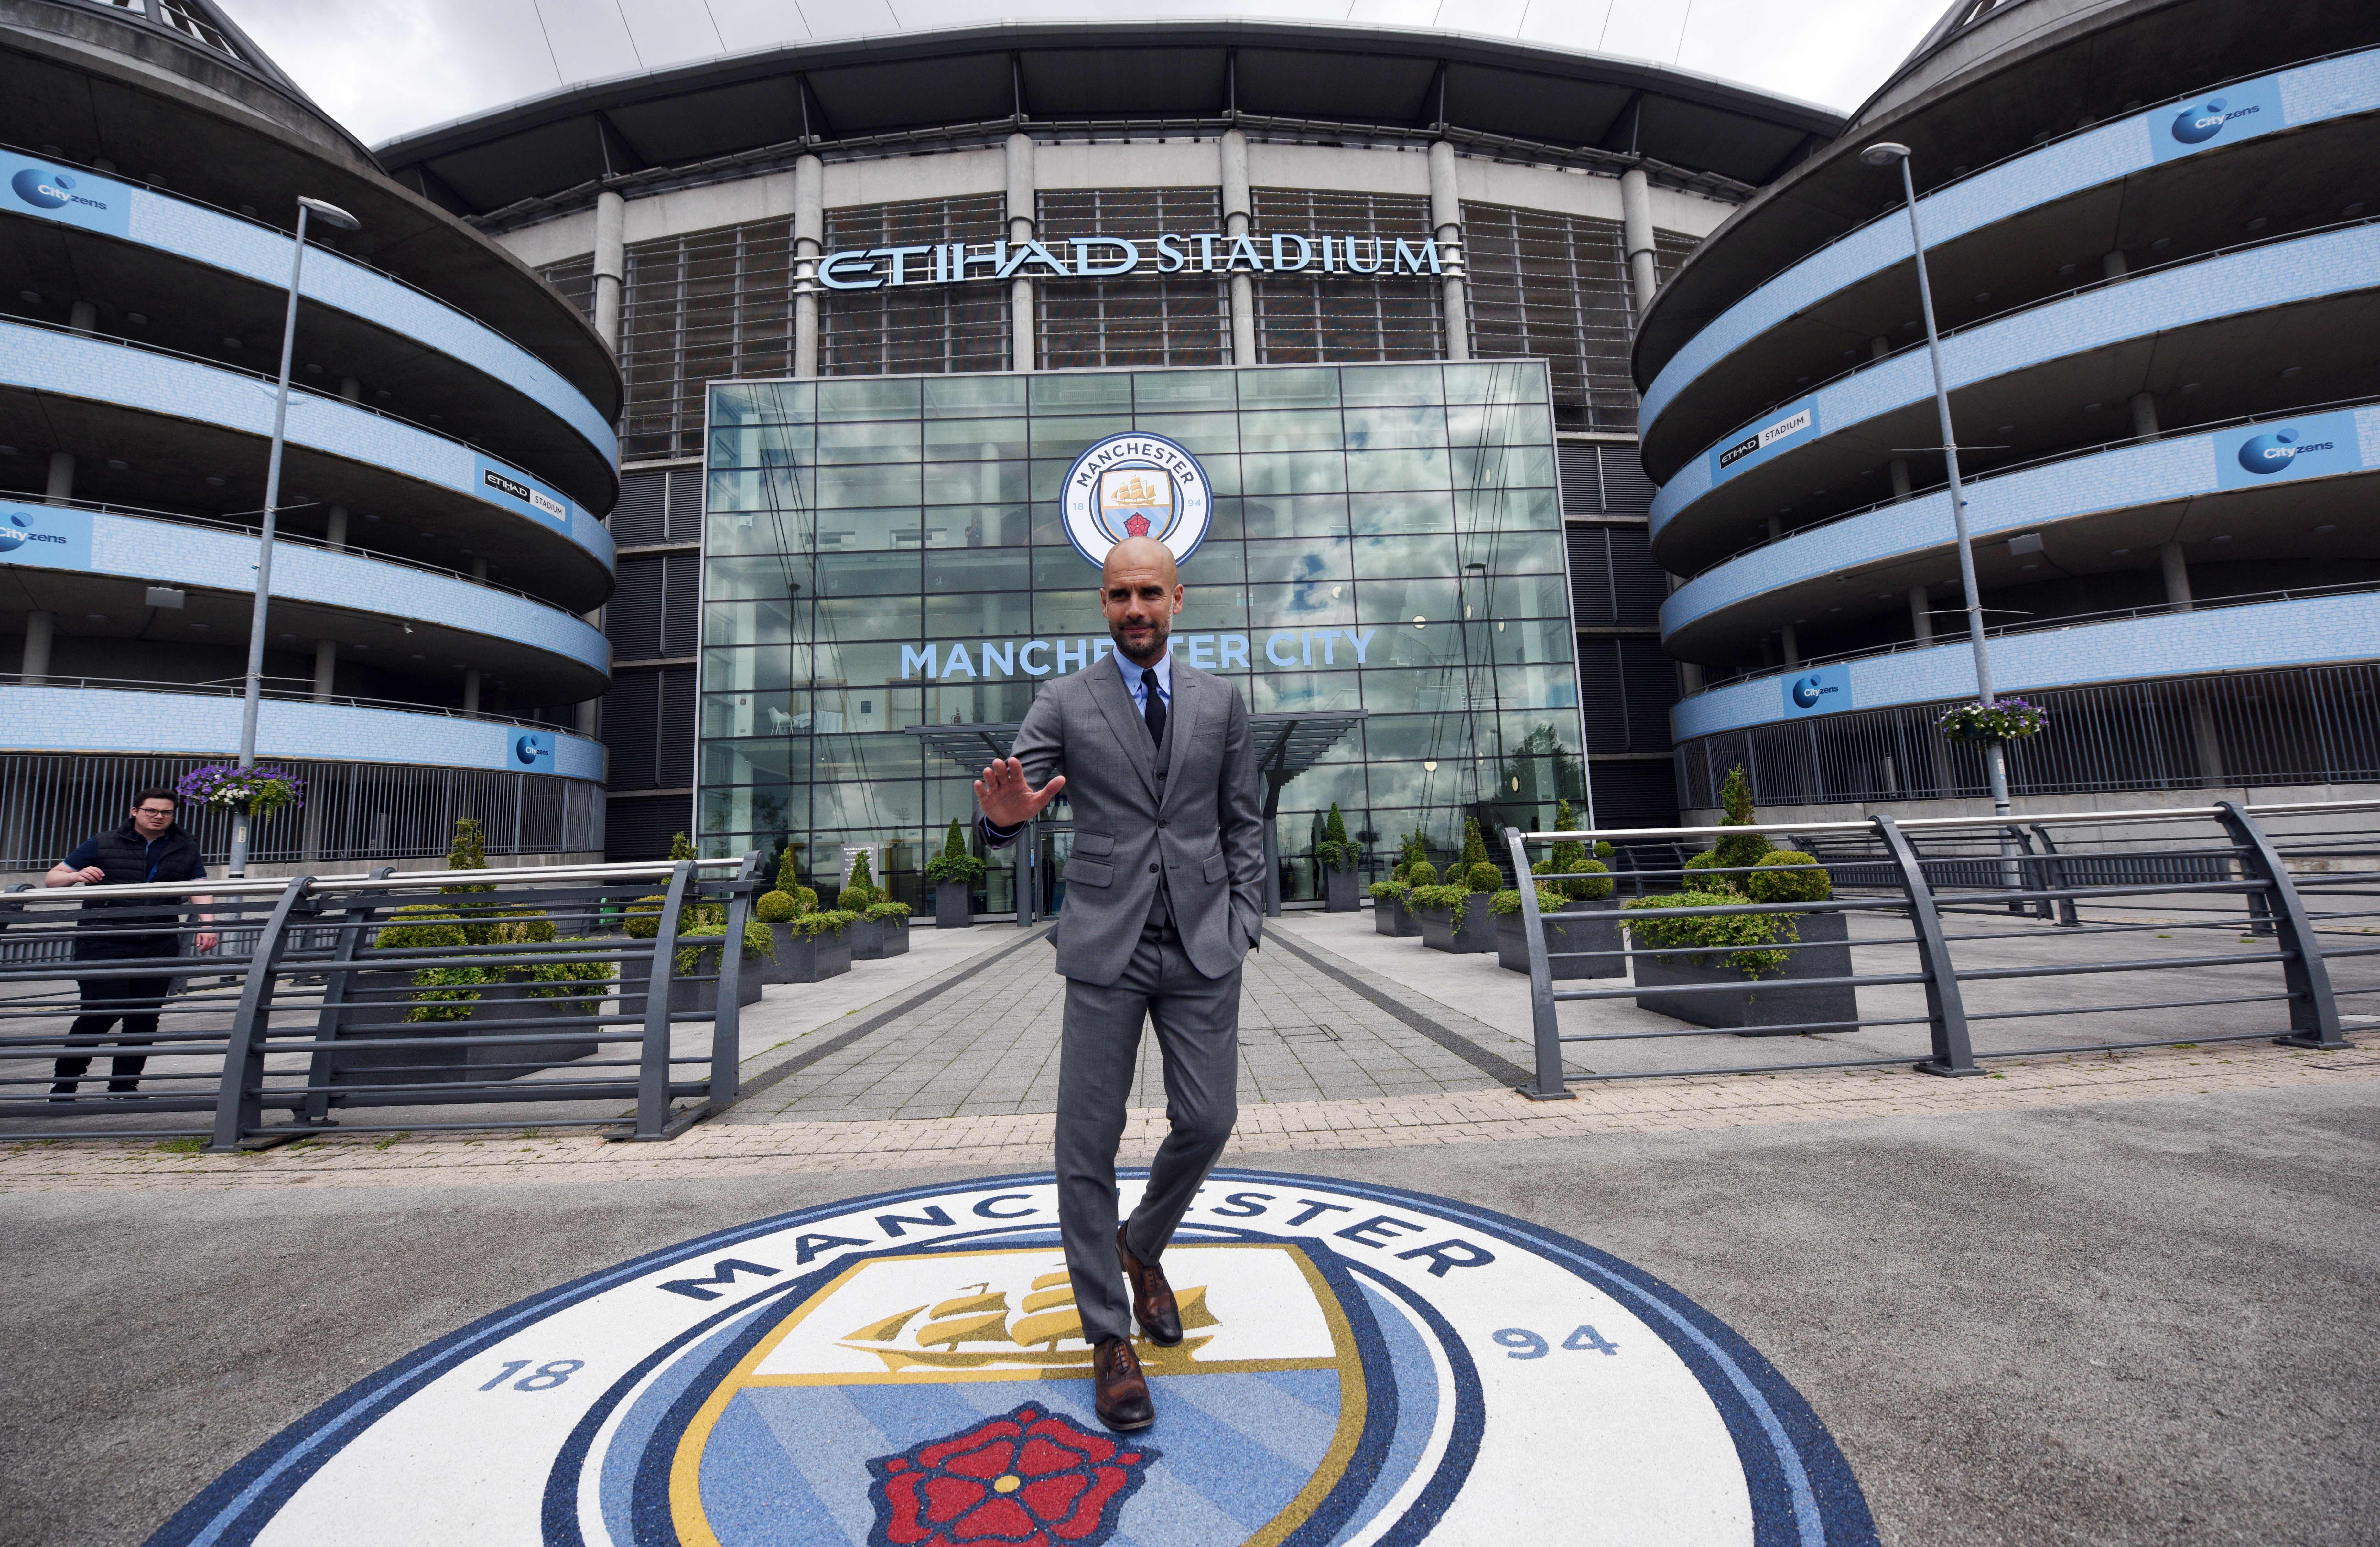 Manchester City's Spanish football coach Pep Guardiola poses for photographs outside the Etihad Stadium in Manchester, northern England, on July 8, 2016.

Pep Guardiola has warned his Manchester City players that they have to prove themselves all over again following his arrival at the club. / AFP / OLI SCARFF / RESTRICTED TO EDITORIAL USE. NO USE WITH UNAUTHORIZED AUDIO, VIDEO, DATA, FIXTURE LISTS, CLUB/LEAGUE LOGOS OR "LIVE" SERVICES. ONLINE IN-MATCH USE LIMITED TO 45 IMAGES, NO VIDEO EMULATION. NO USE IN BETTING, GAMES OR SINGLE CLUB/LEAGUE/PLAYER PUBLICATIONS.        (Photo credit should read OLI SCARFF/AFP/Getty Images)